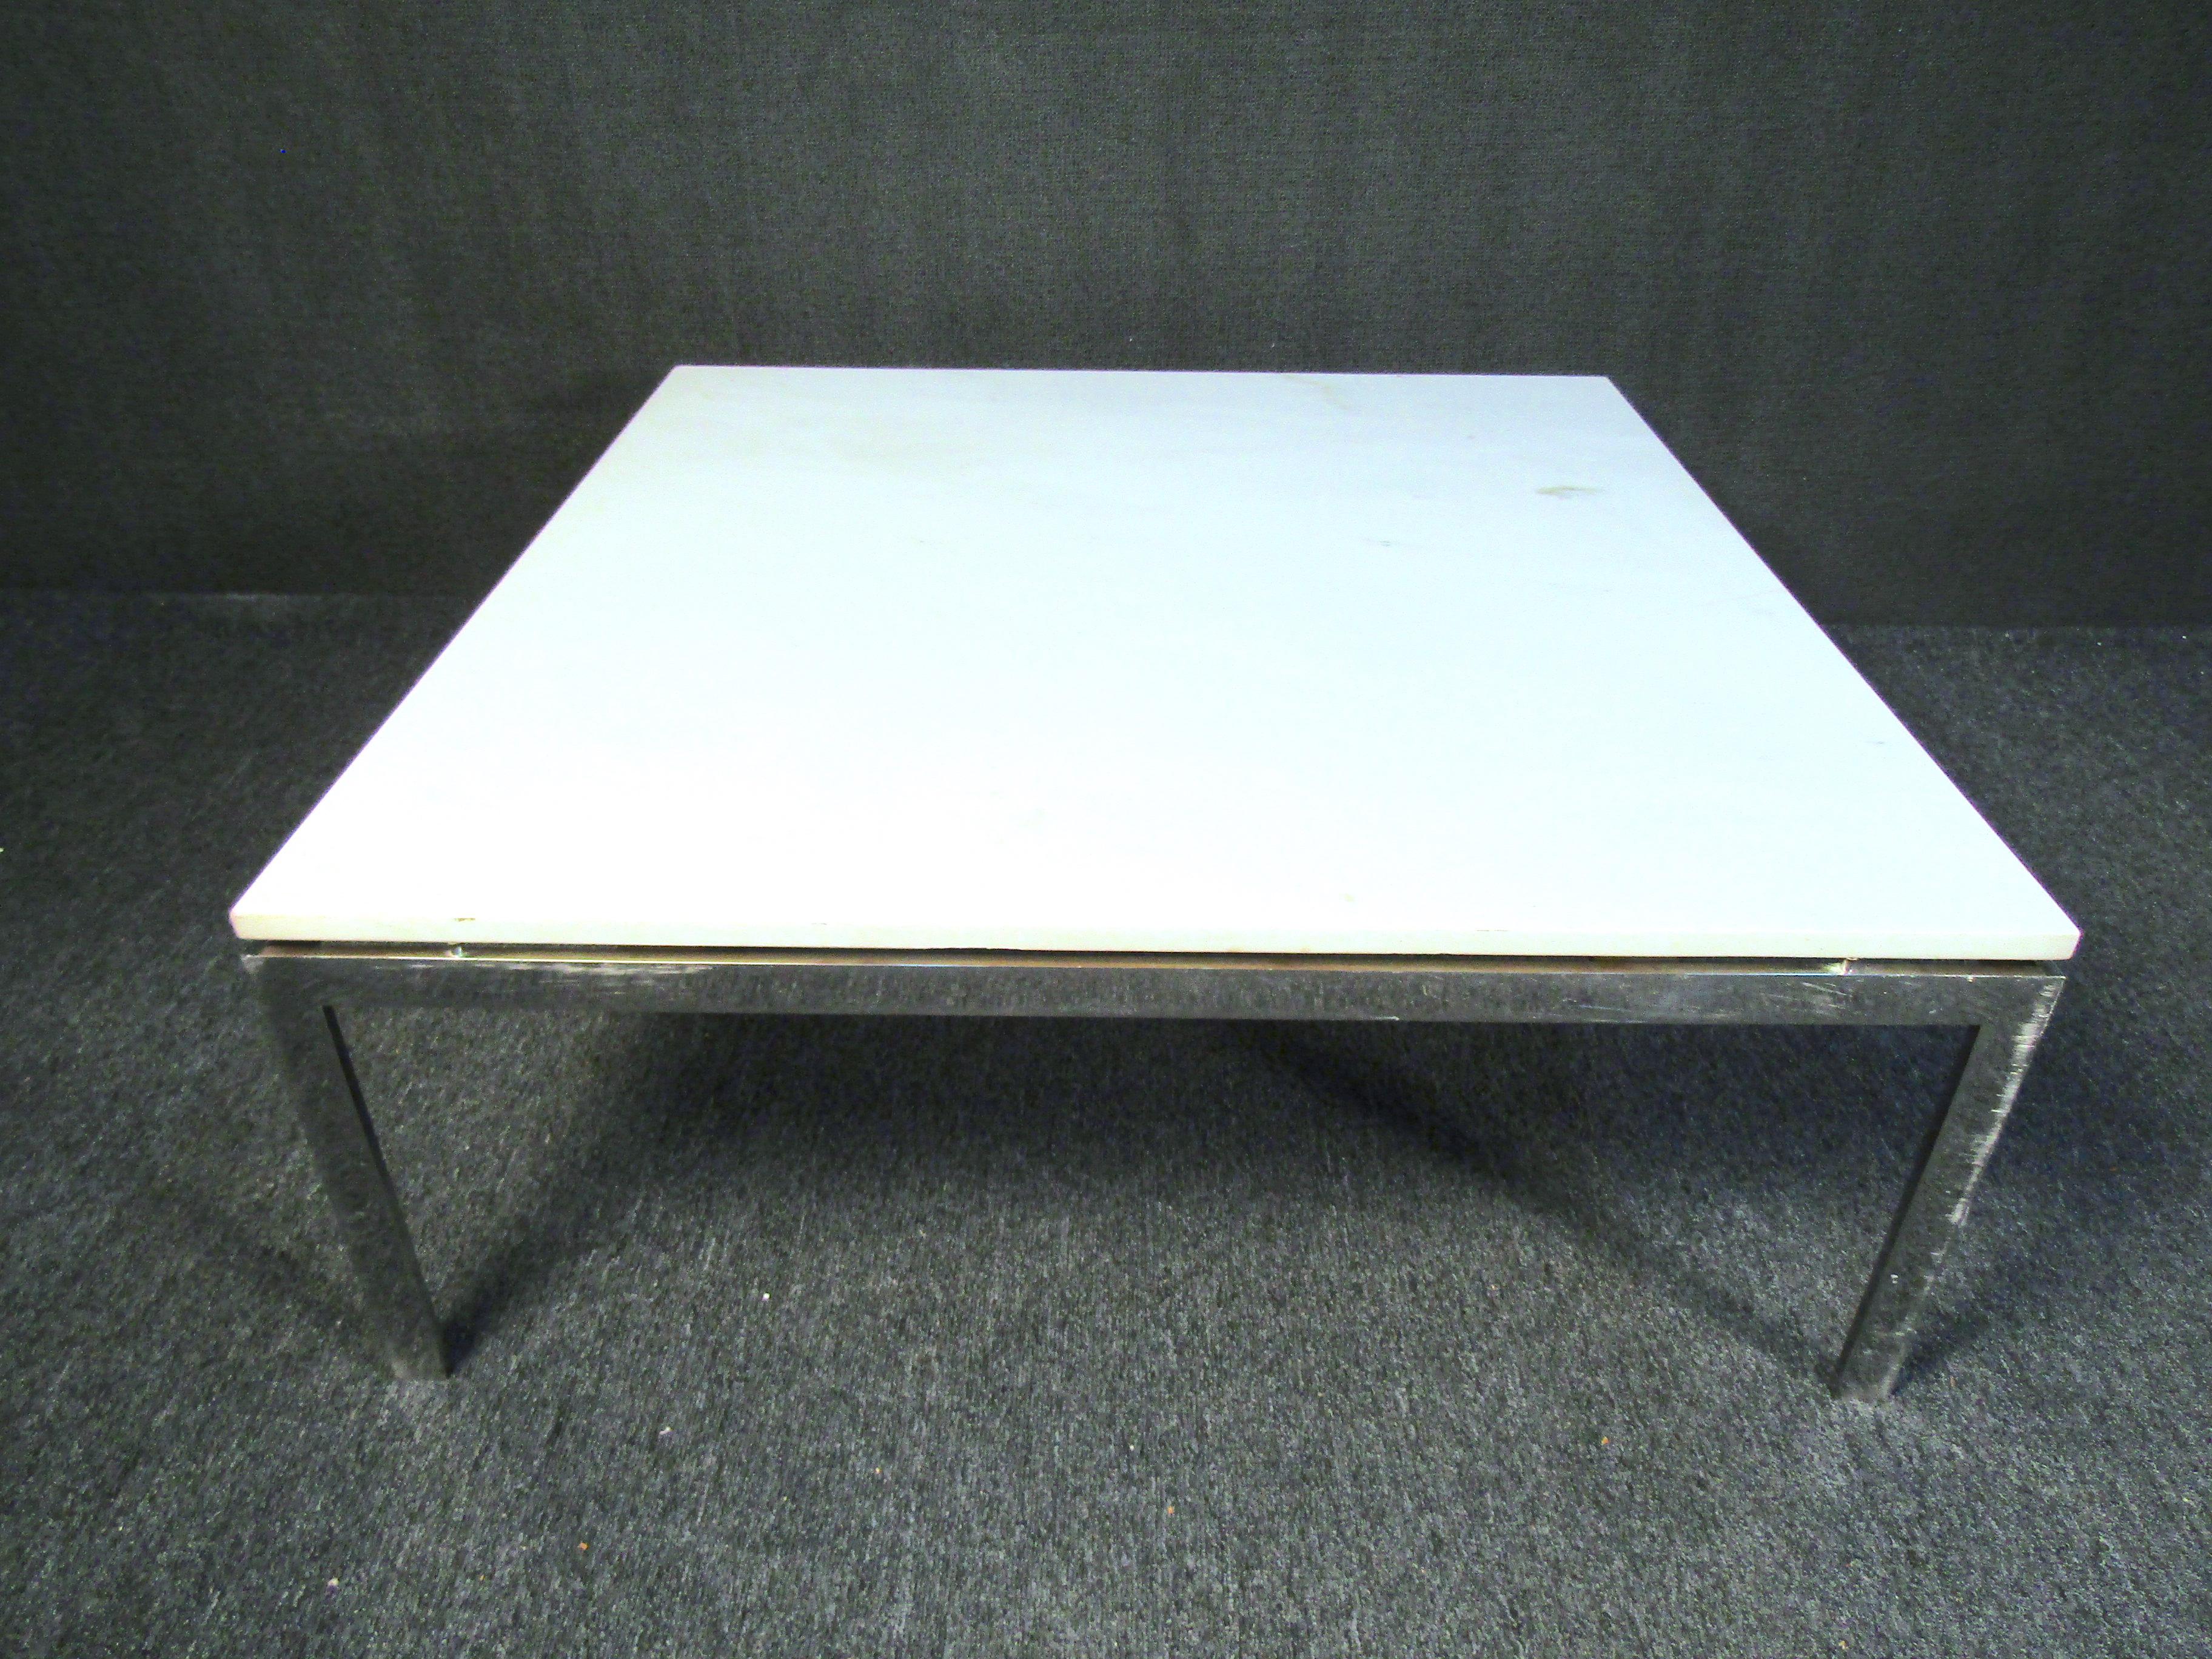 Mid-Century Modern square coffee table combining an elegant marble top with a chrome base. This striking combination of materials and classic design by Milo Baughman makes for an interesting piece that is sure to stand out in any room. Please